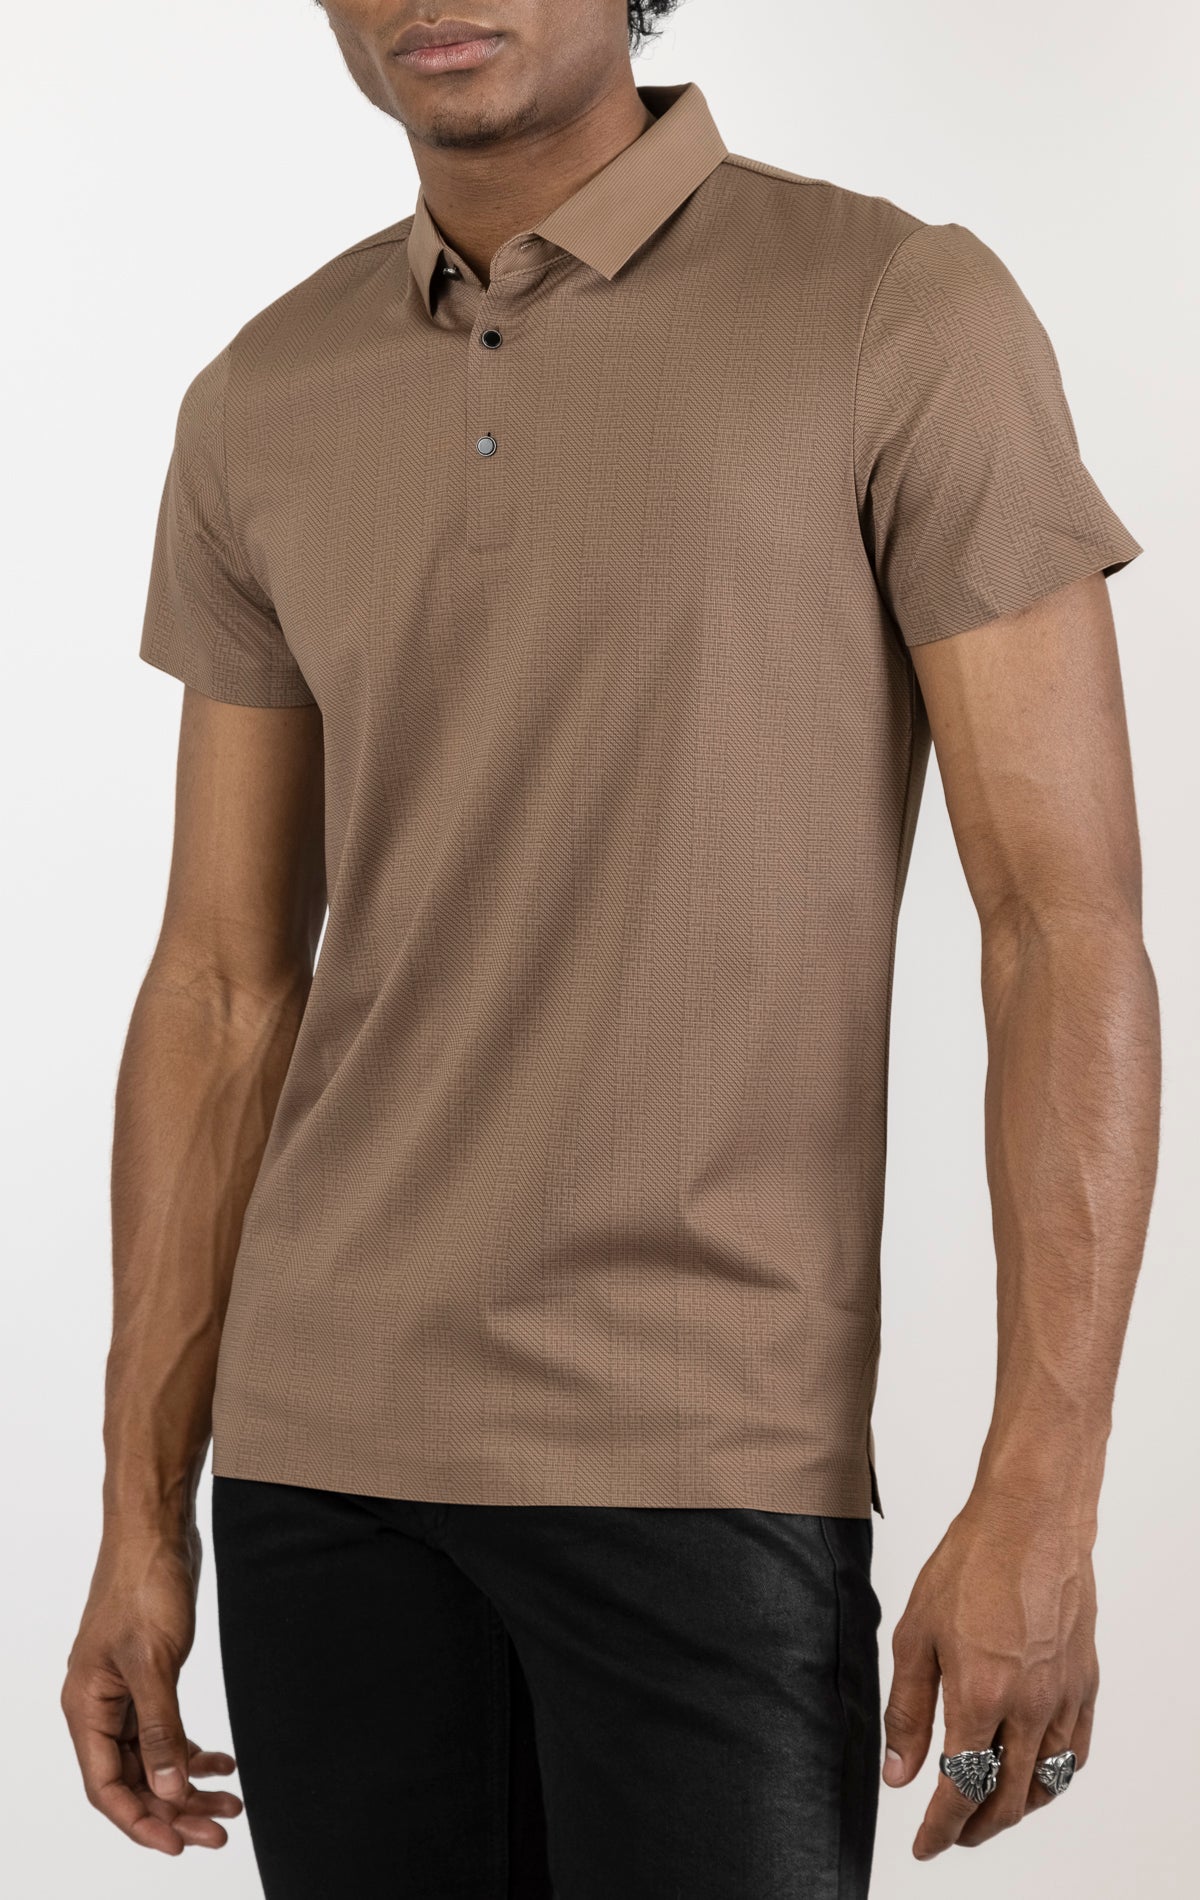 Men's versatile stretch polo shirt in khaki. The polo is made from an 87% nylon, 13% spandex blend and features a seamless pattern design, a classic polo collar with buttons, and short sleeves.